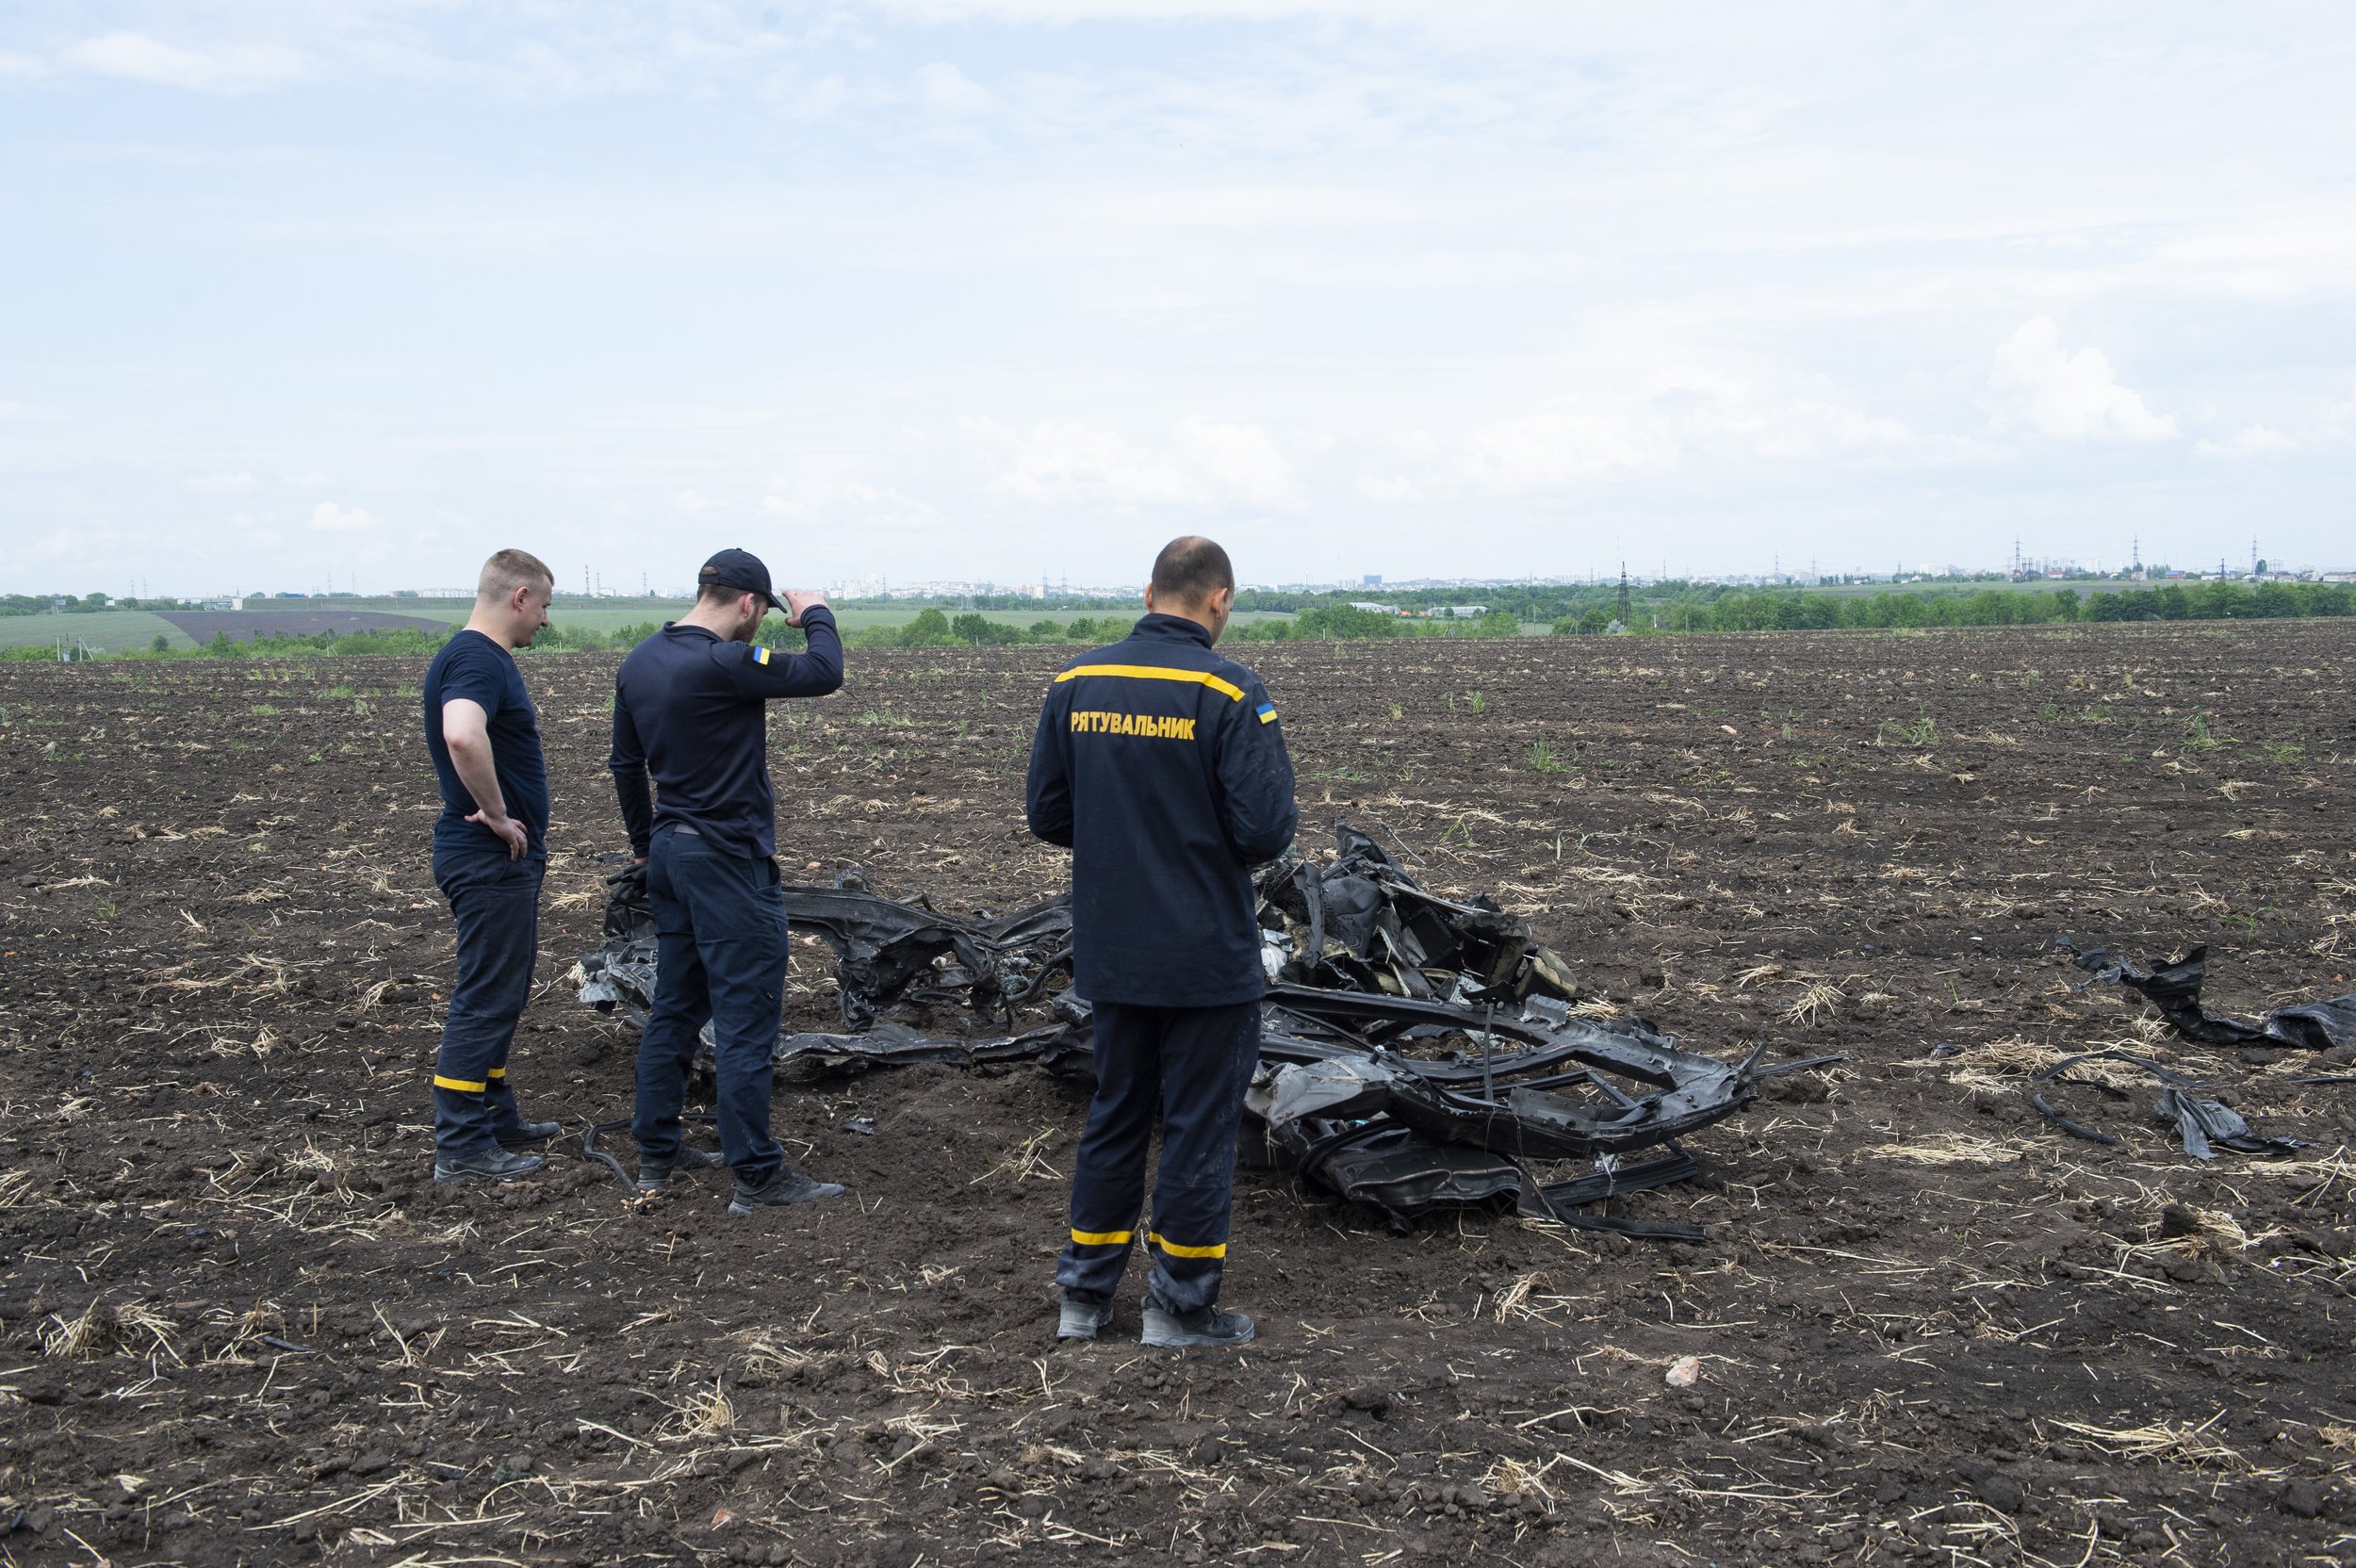  Emergency personnel investigate the remains of a destroyed car in a field in Dnipro, Ukraine on May 24, 2023. A Russian missile struck an emergency response center in Dnipro, destroying a number of ambulances and reserve medical equipment. 